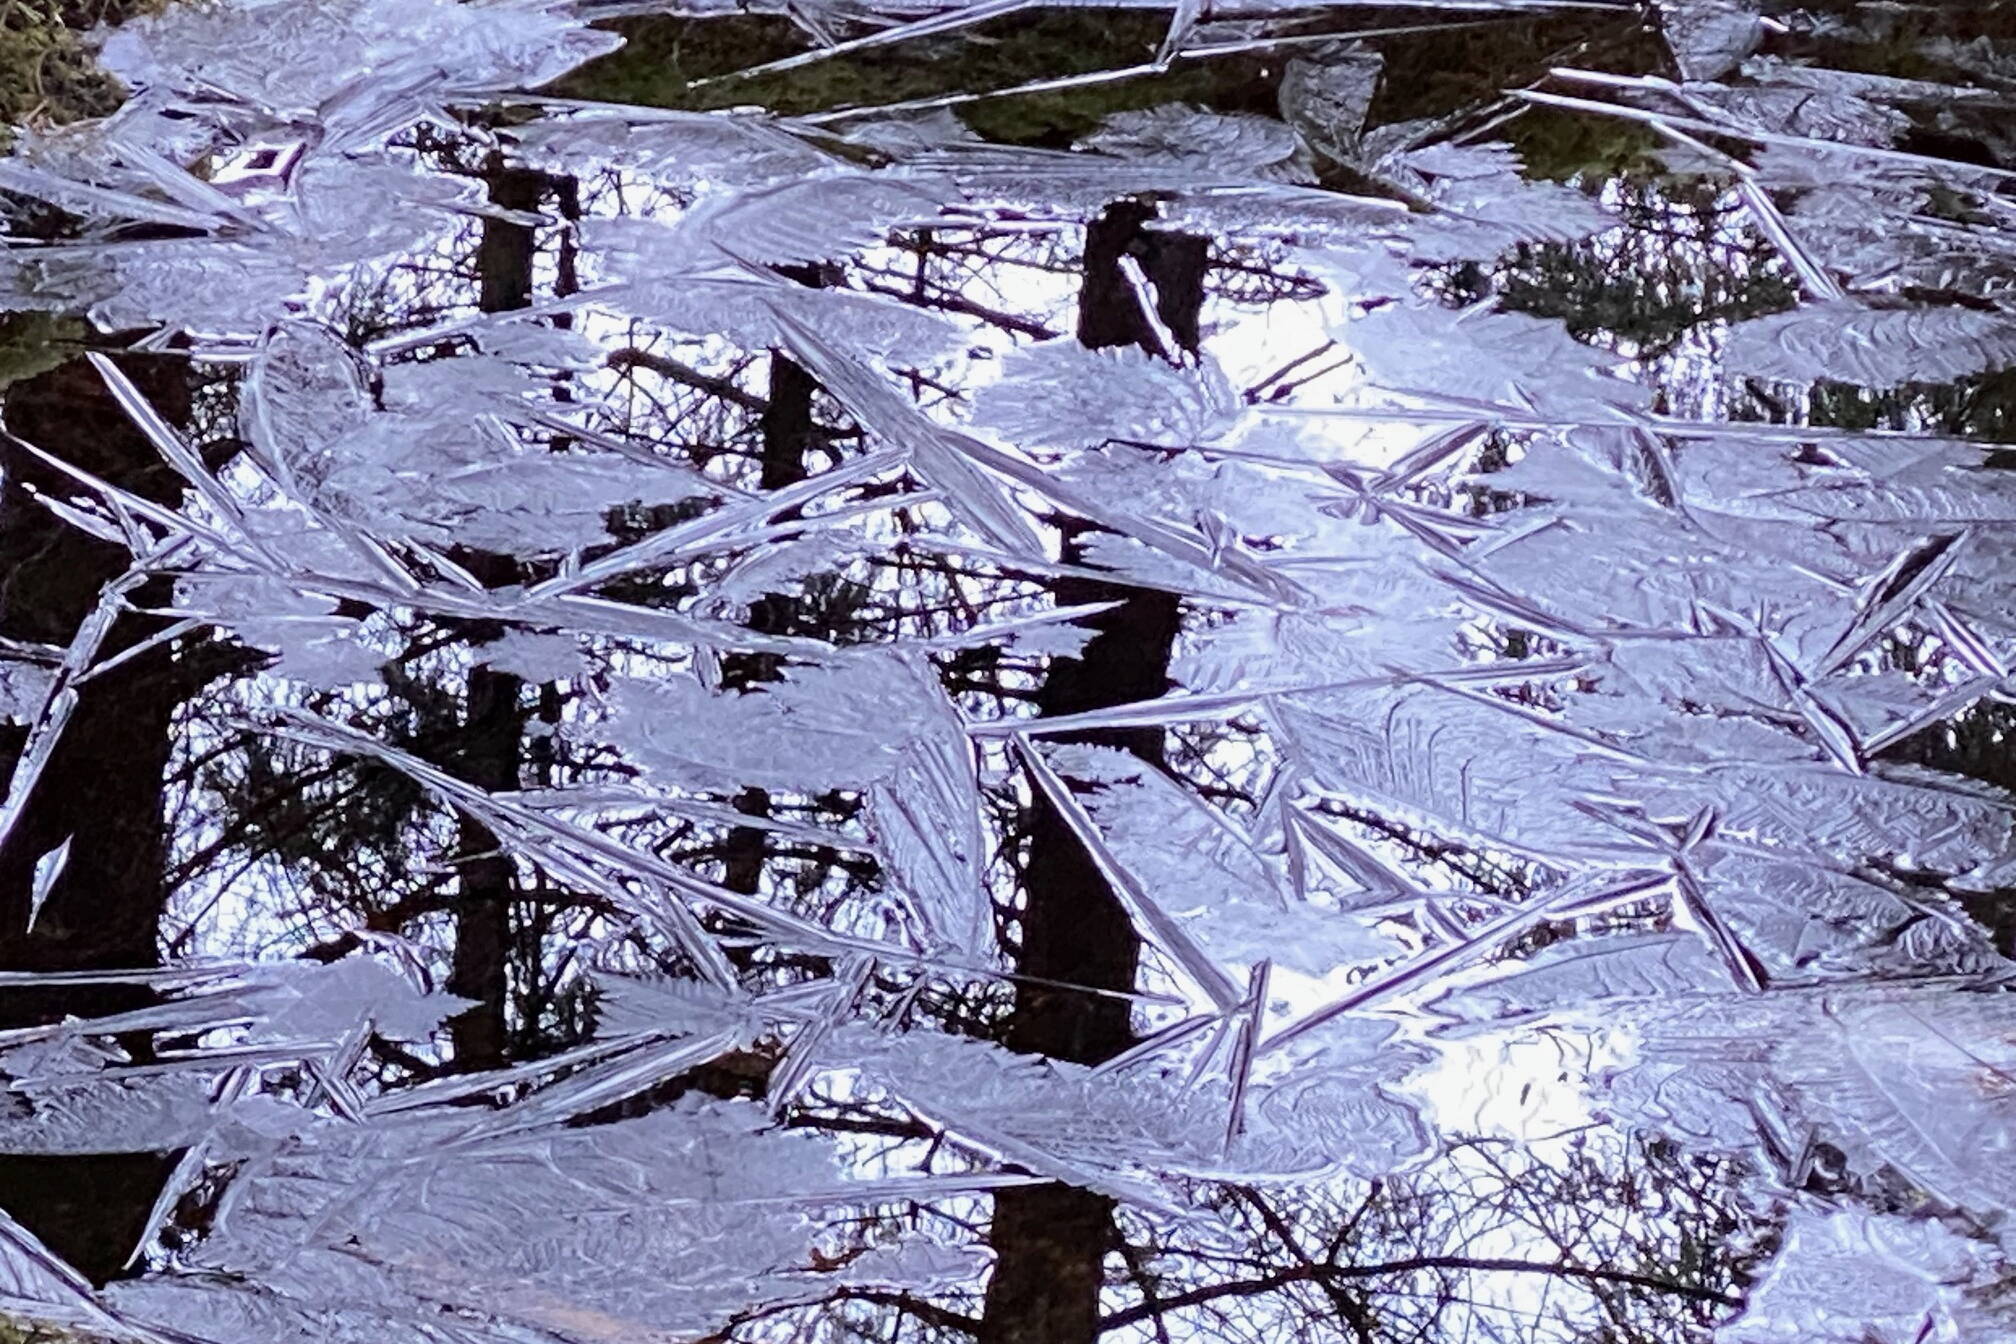 Tree reflections and icy patterns on an East Glacier Trail pond Nov. 29. (Photo by Denise Carroll)